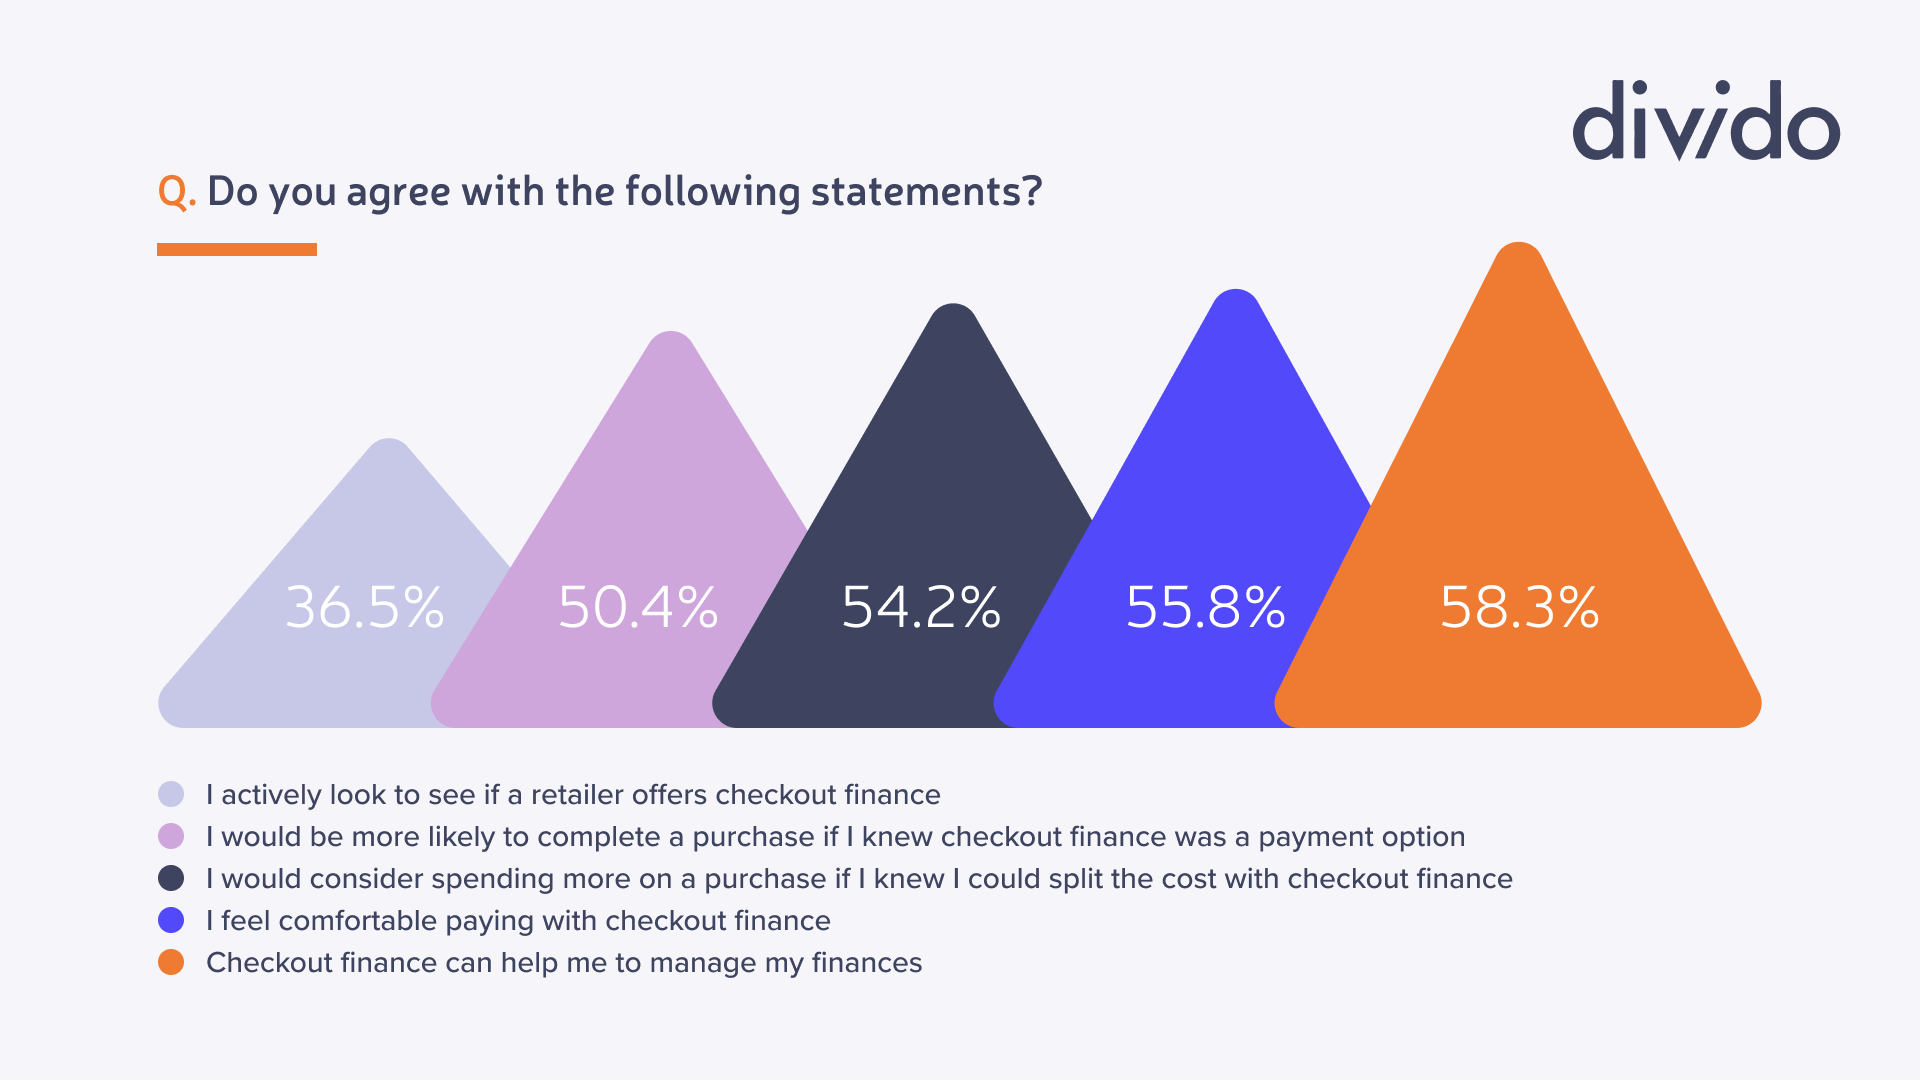 Infographic by Divido, showing responses to various questions around sentiment towards checkout finance